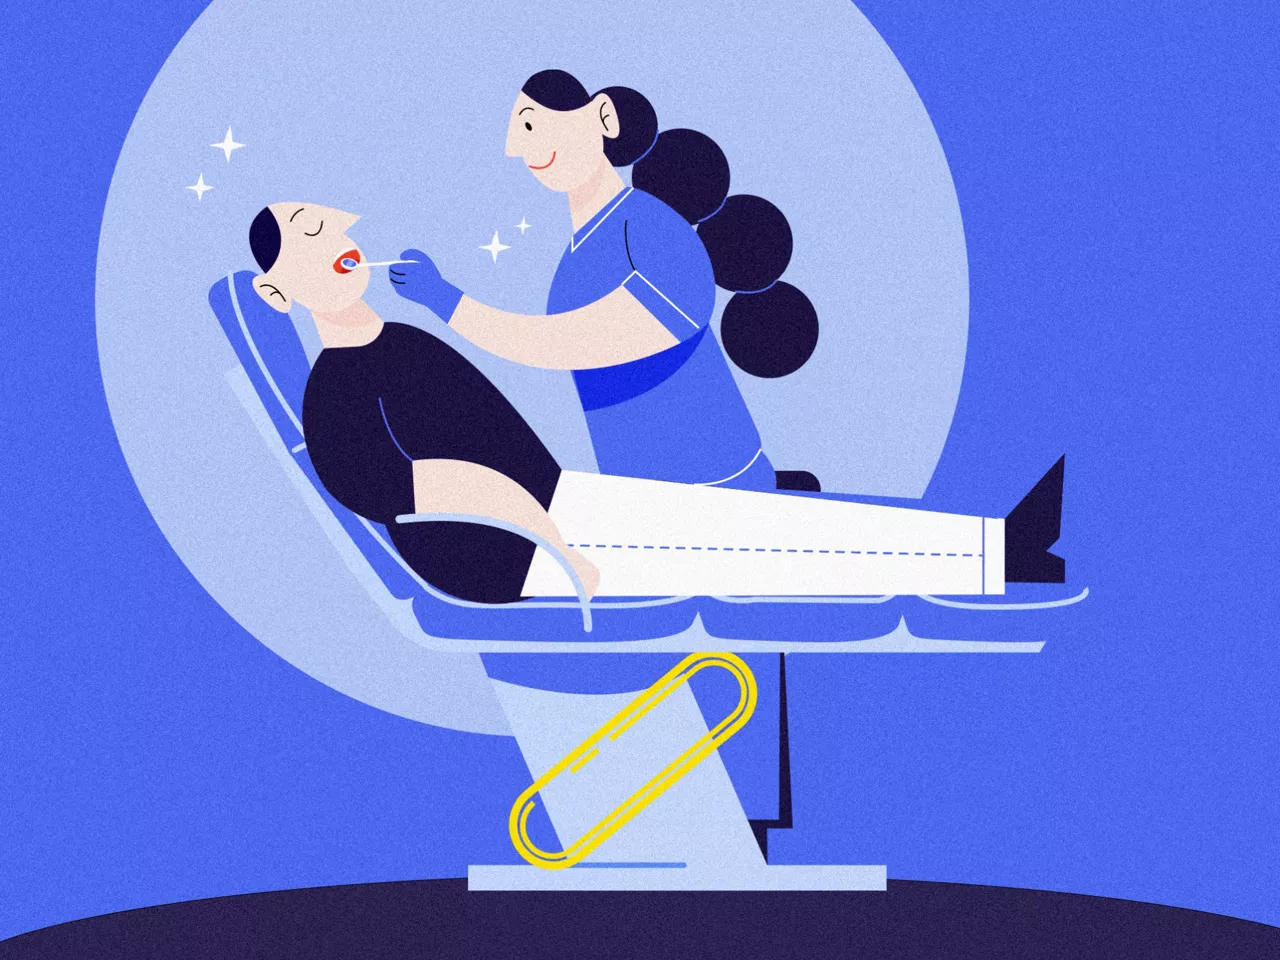 Illustration of a dentist performing dental work on a patient on the chair with a purple background